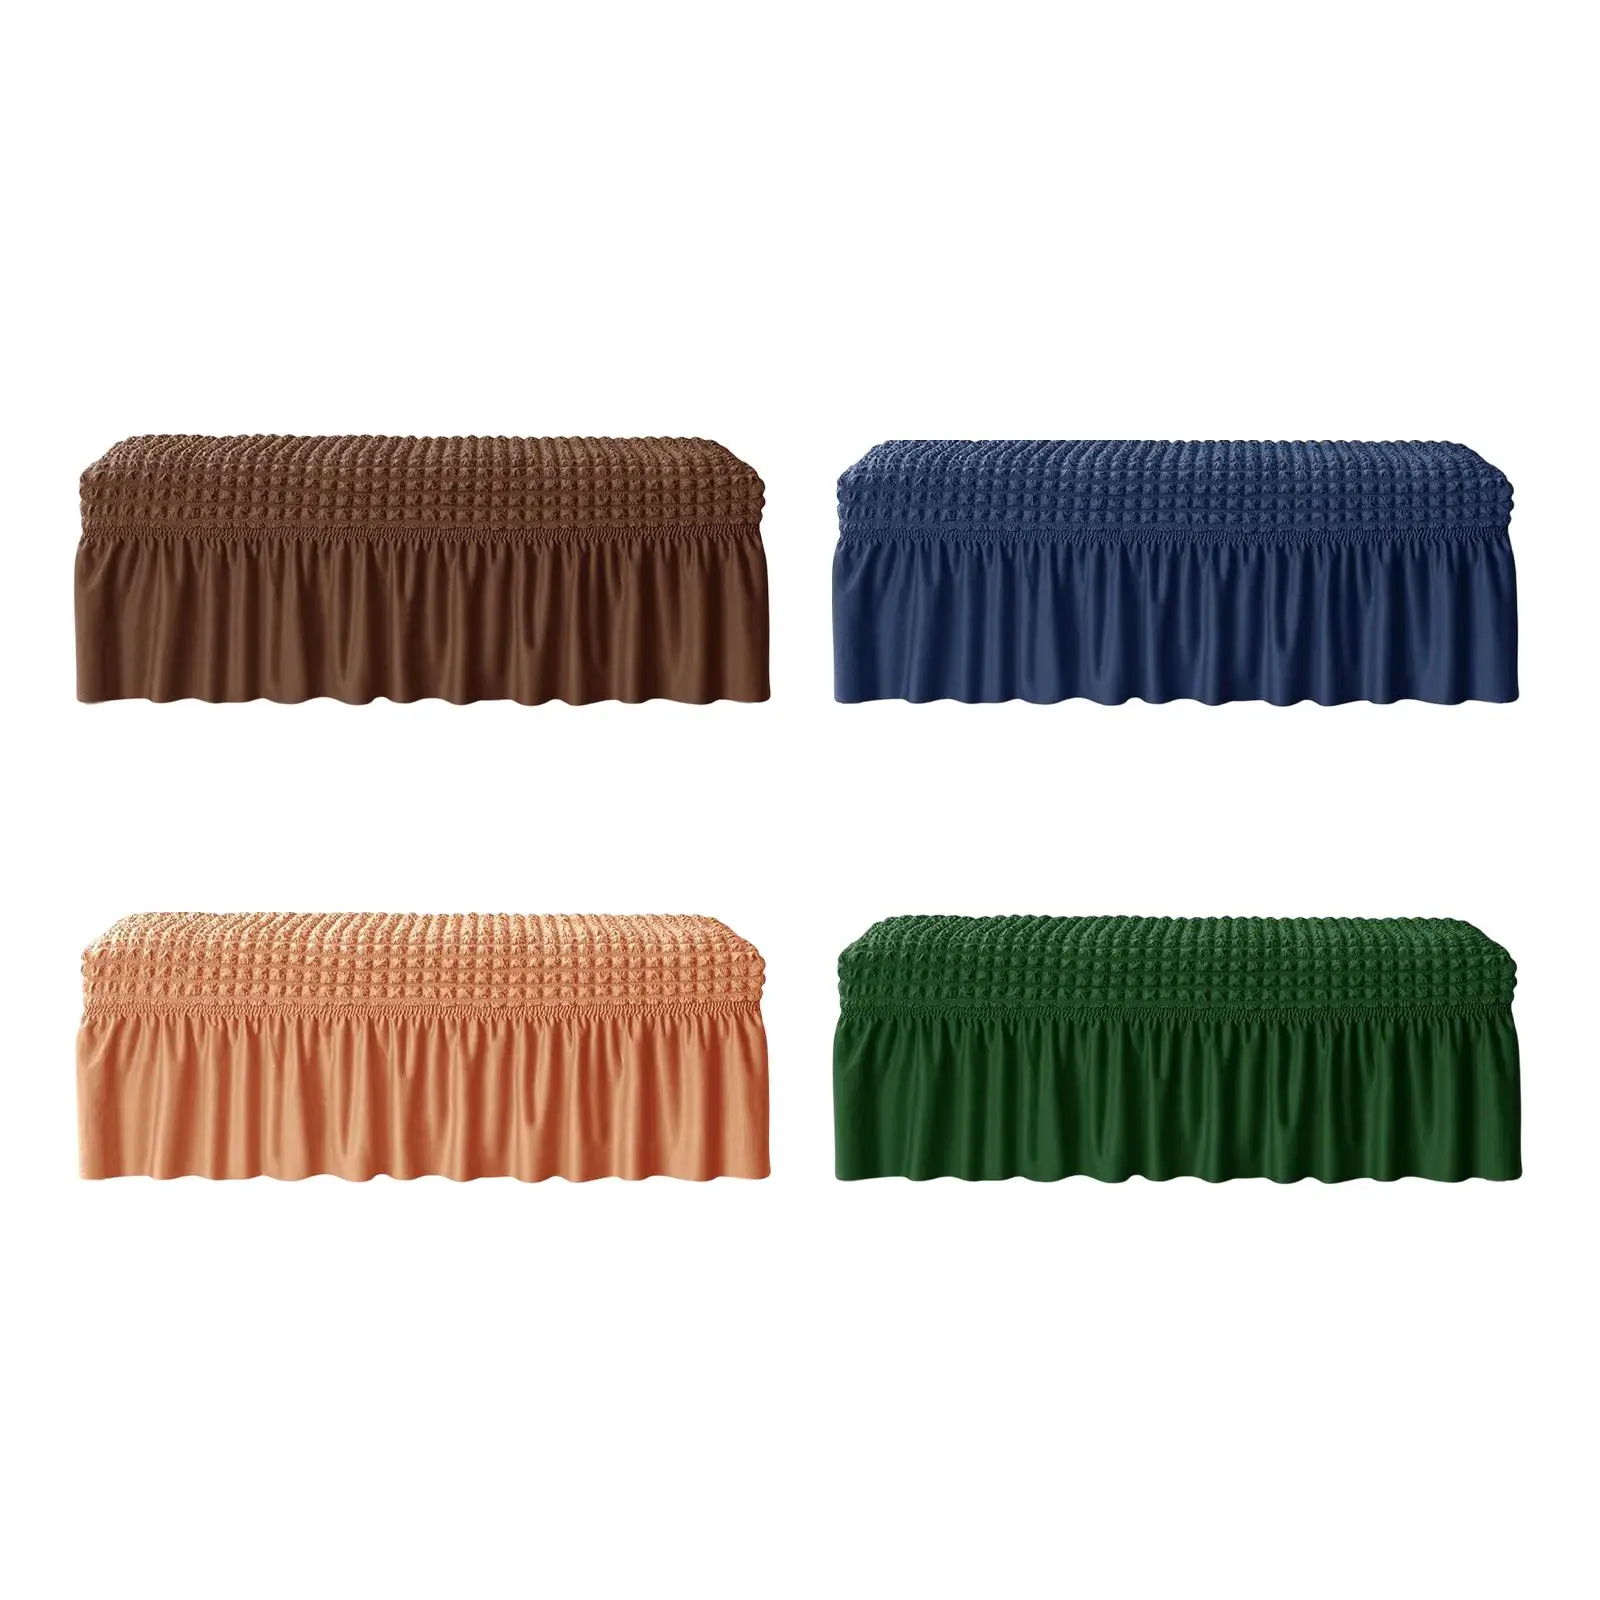 Bench Seat Protector Cover Washable for Restaurant Living Room Living Room